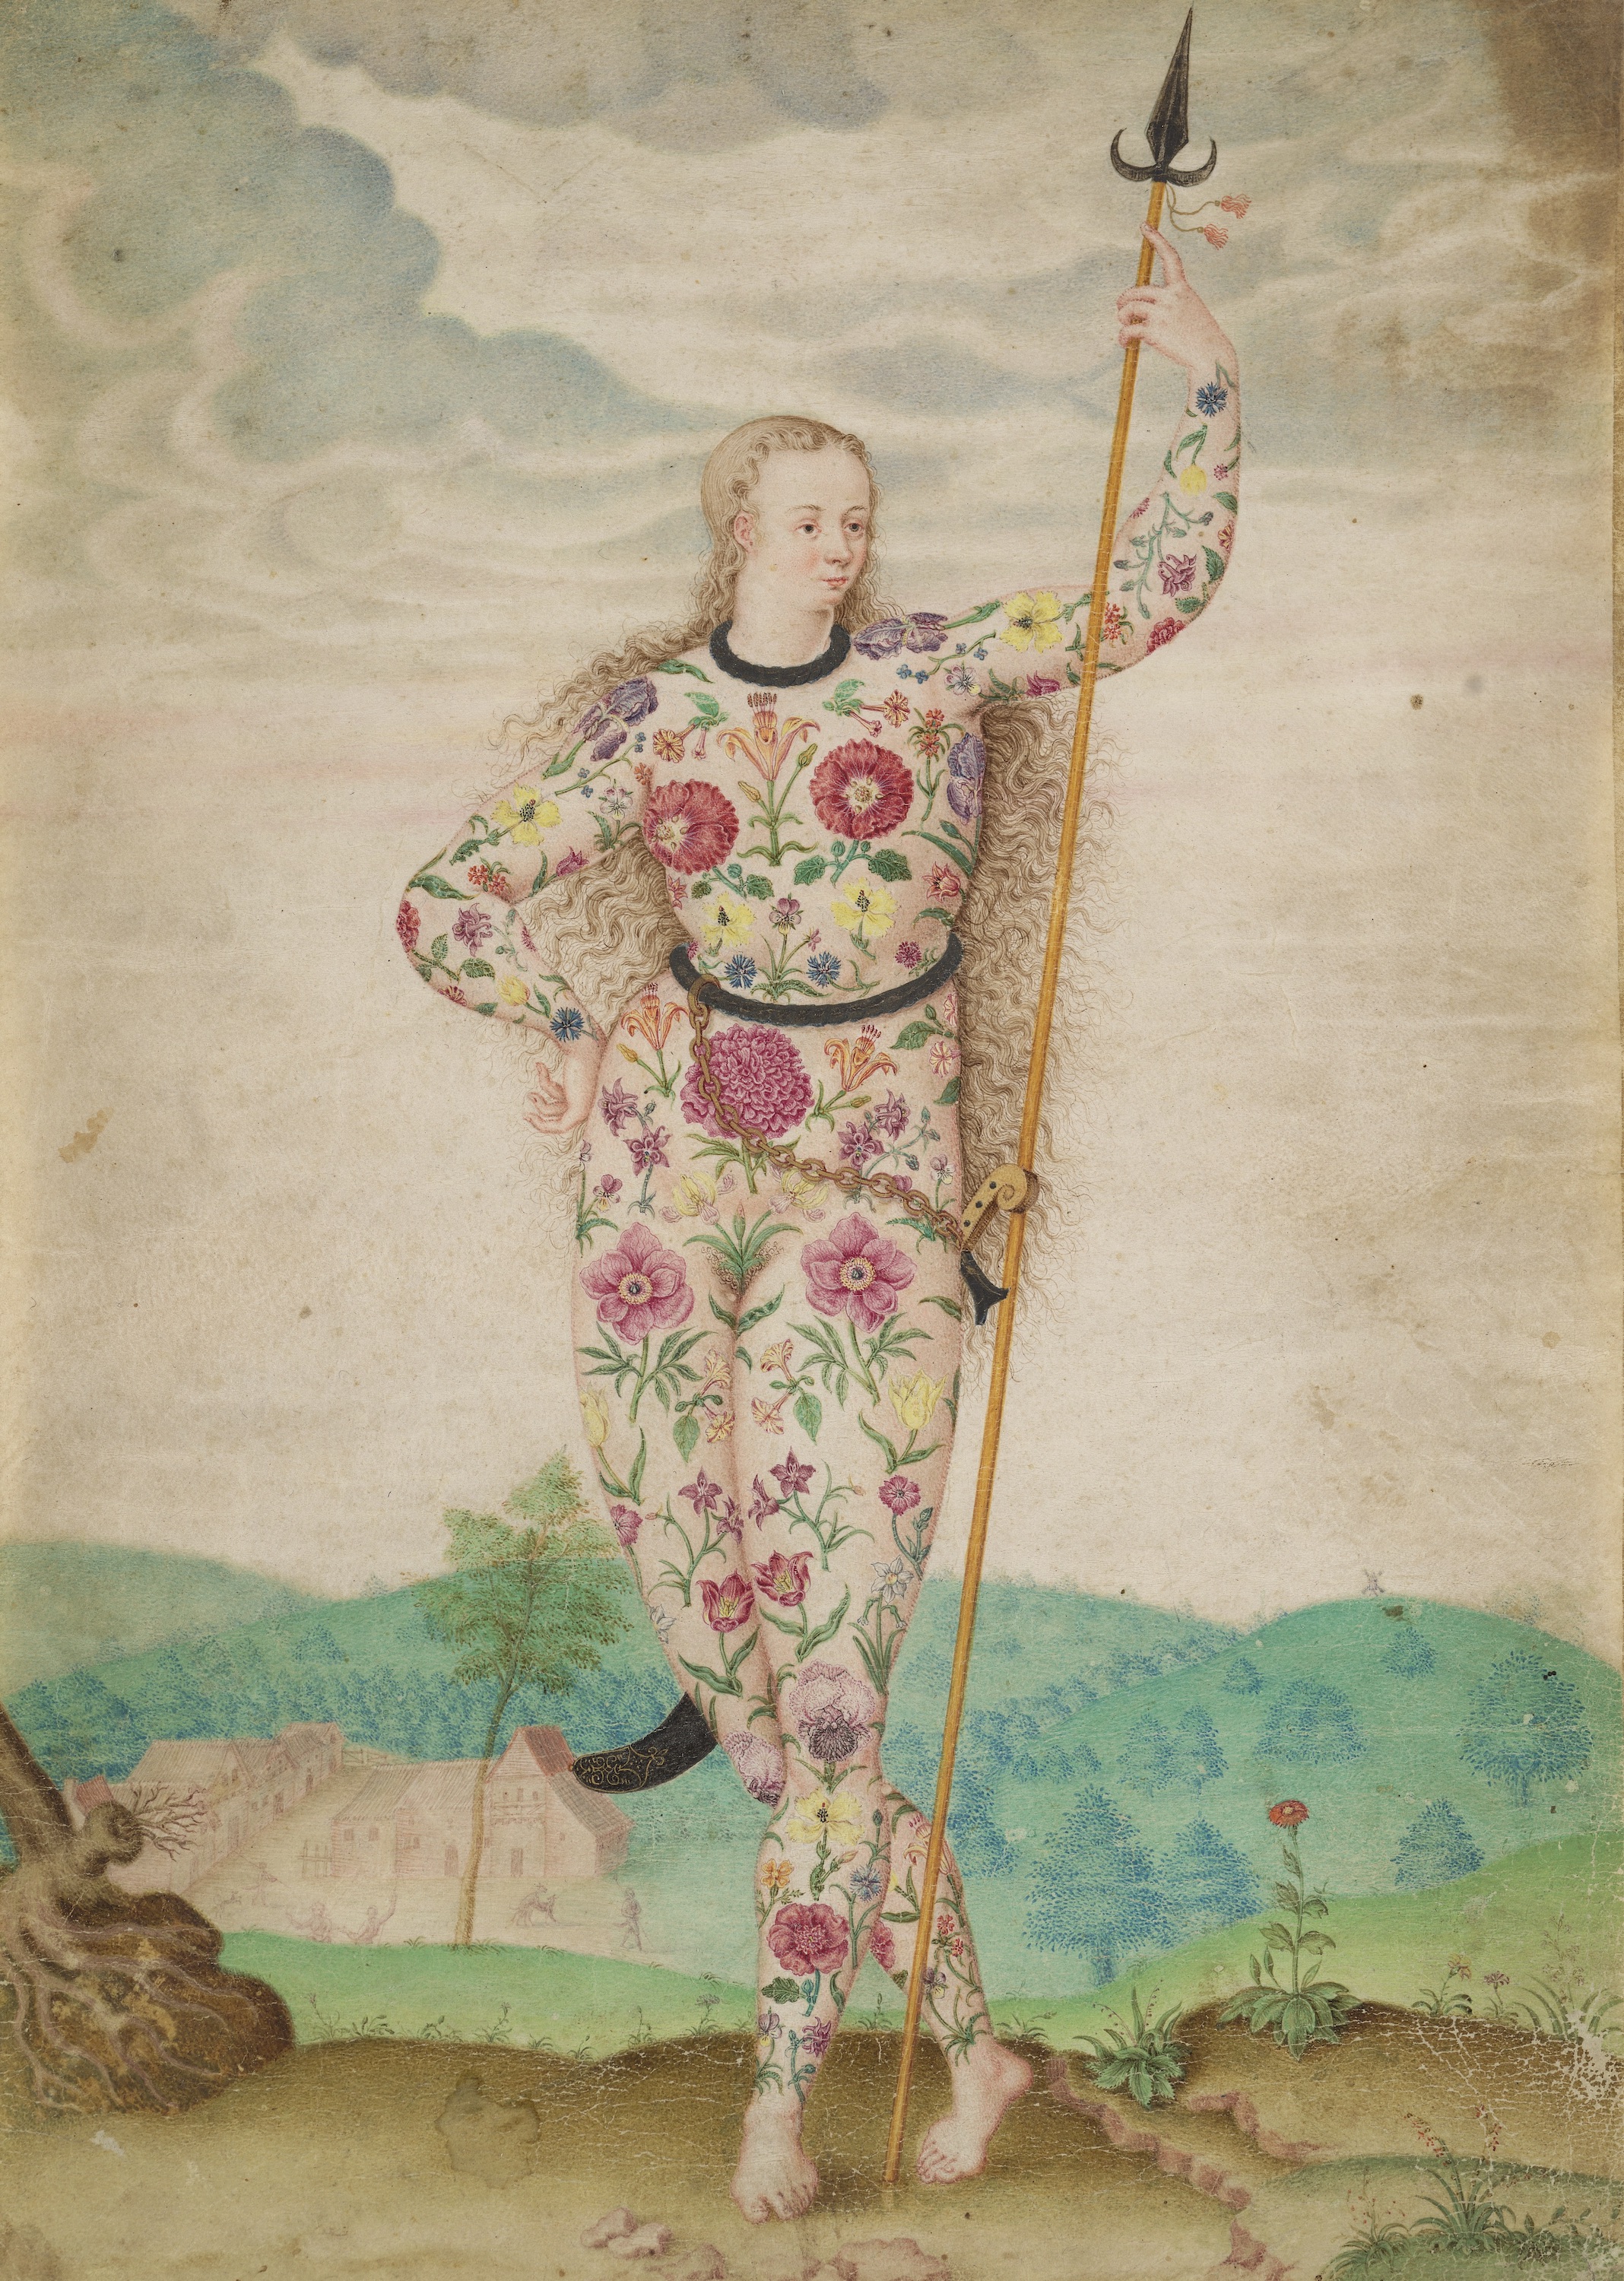 A Young Daughter of the Picts by Jacques Le Moyne de Morgues - c. 1585 - 26 × 18.7 cm Yale Center for British Art